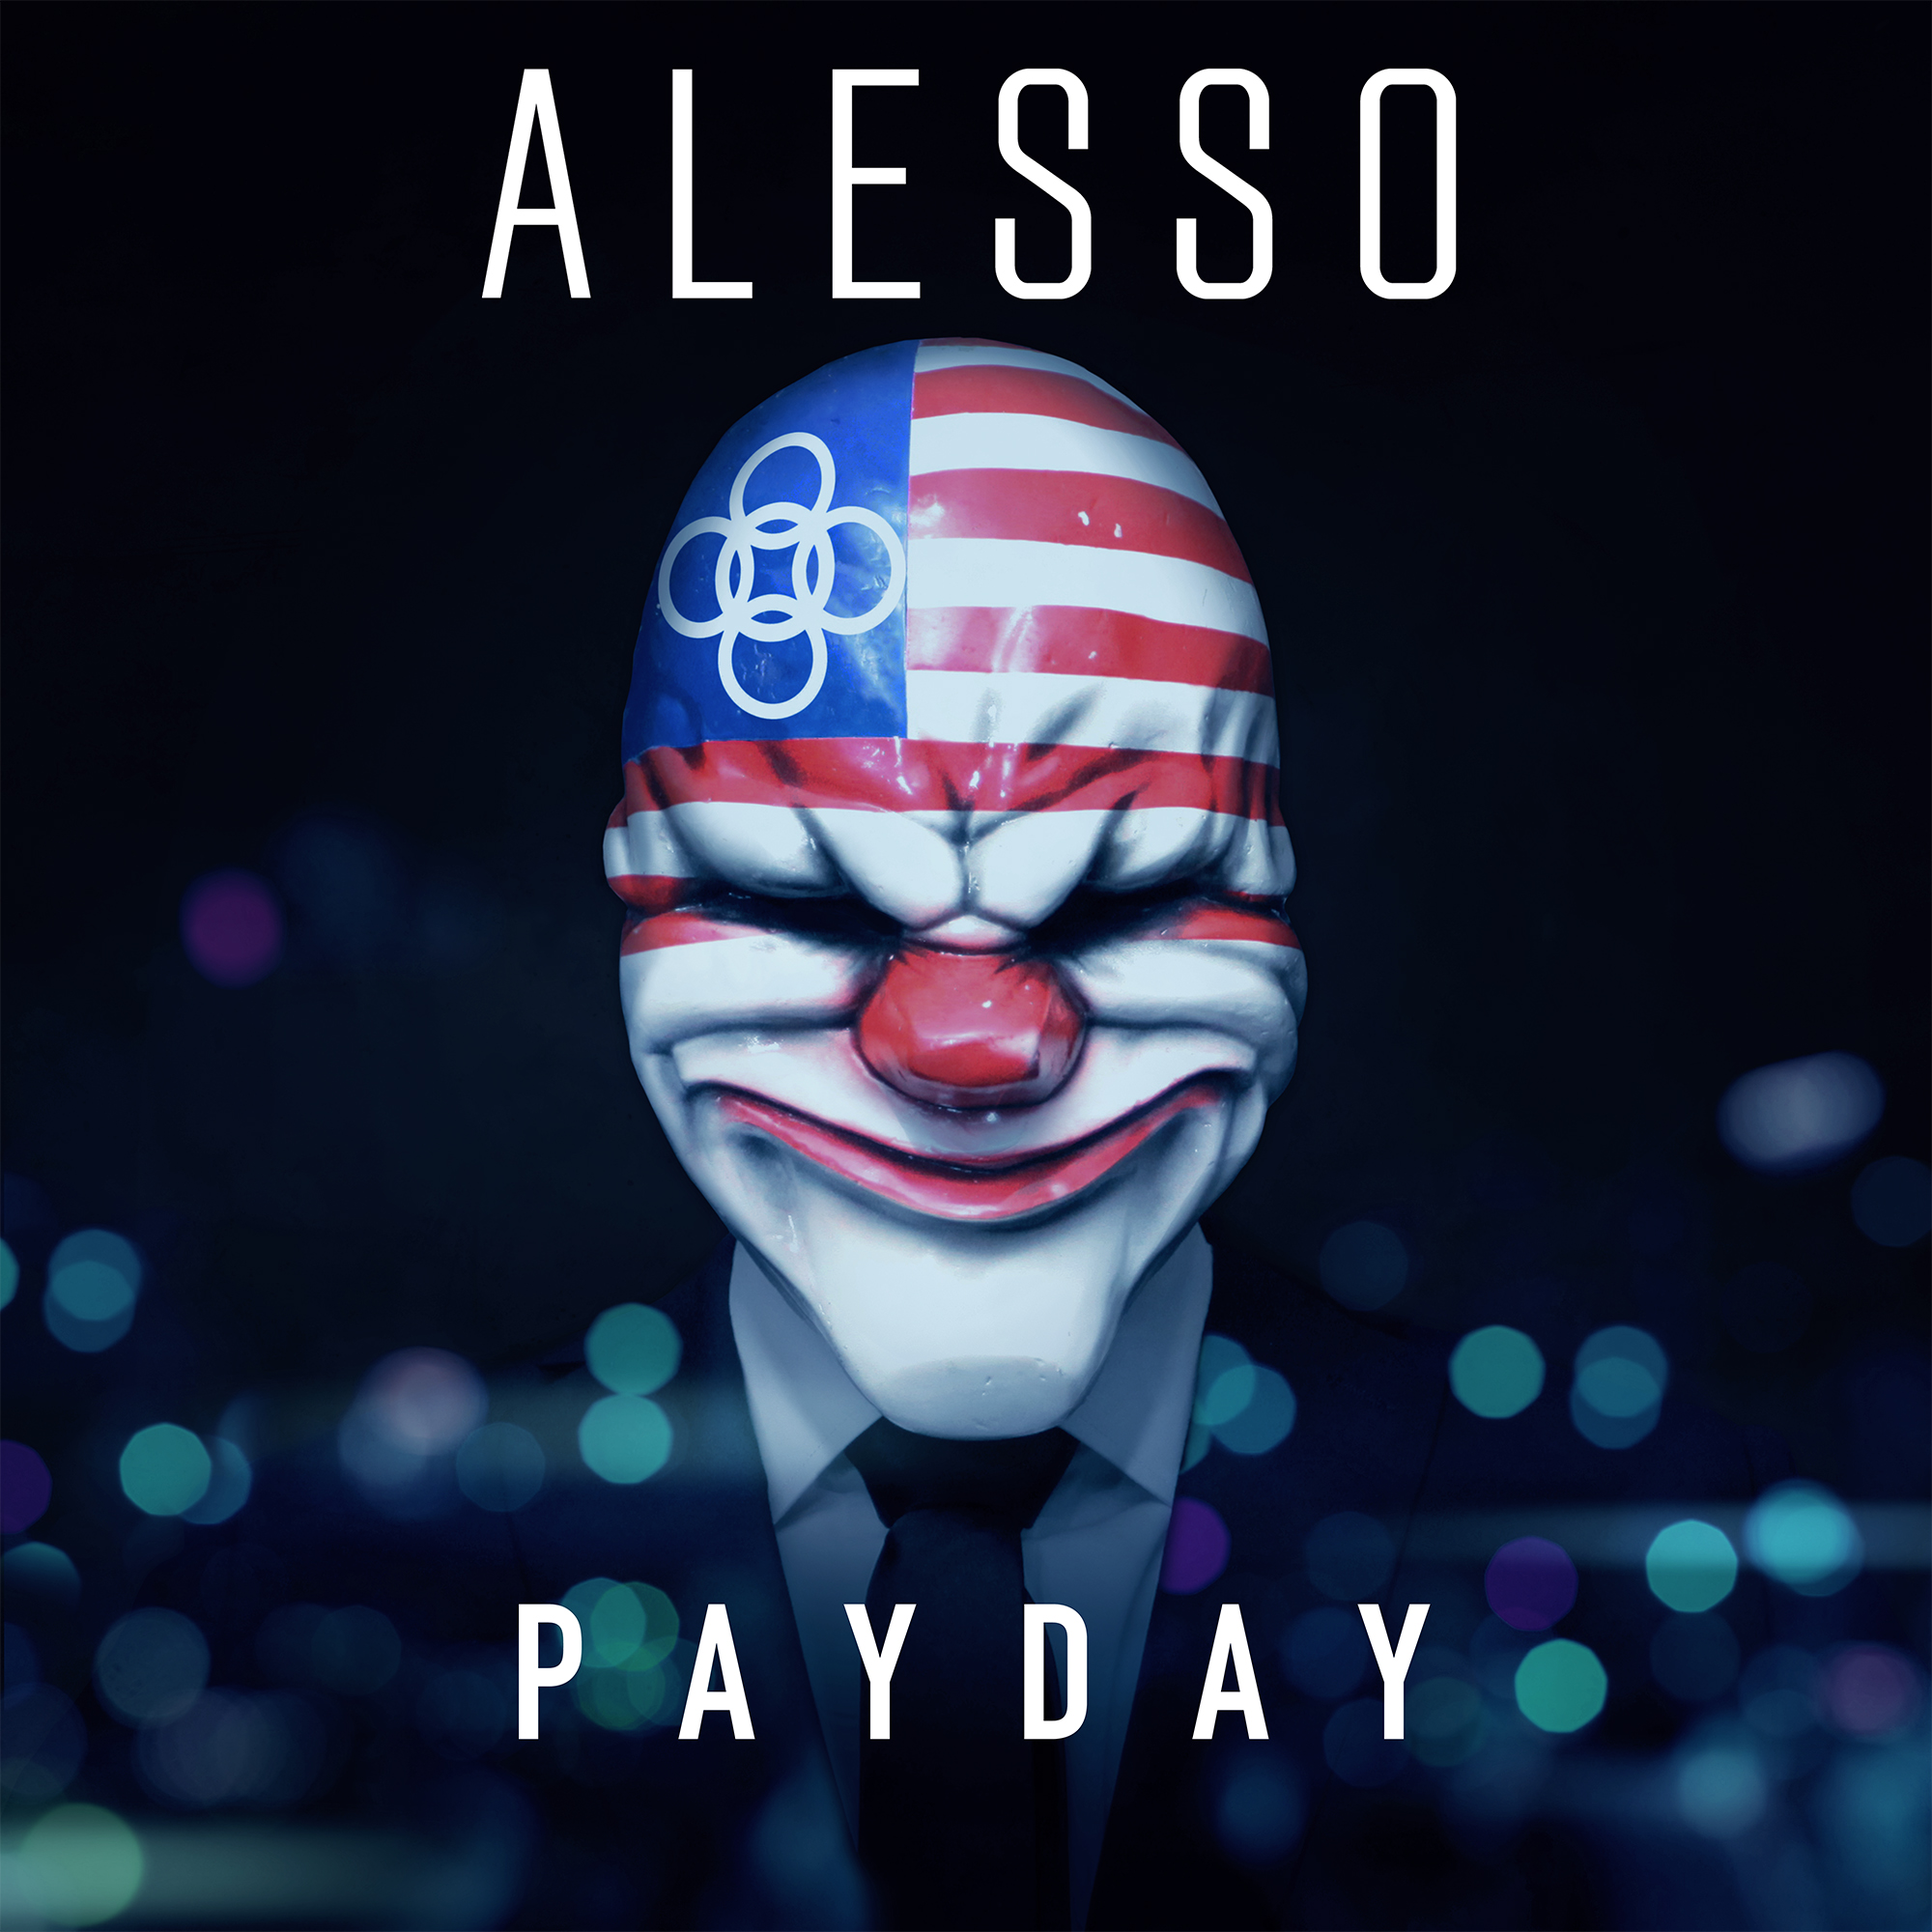 Not to day payday 2 фото 32